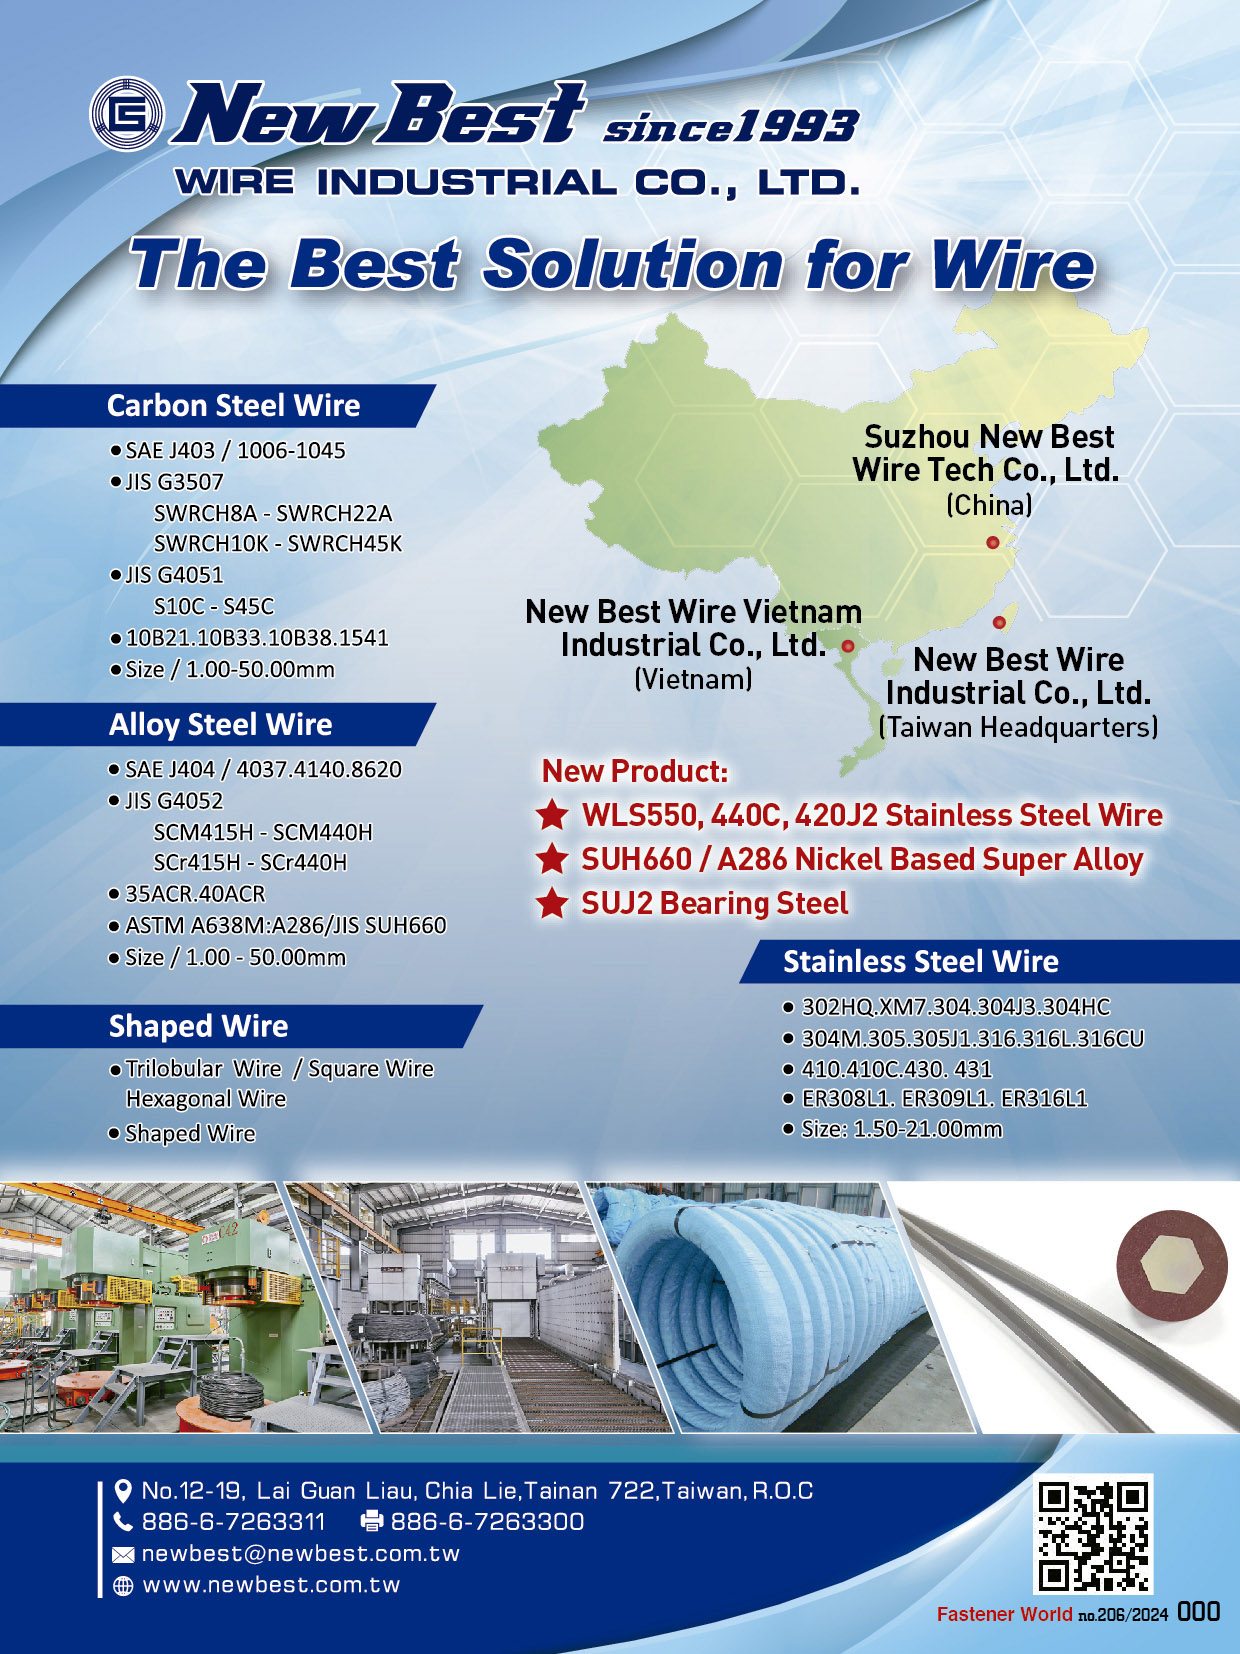 NEW BEST WIRE INDUSTRIAL CO., LTD.  , Carbon Steel Wire, Alloy Steel Wire, Stainless Steel Wire, Nickle-Base Superally, Customized Screws, Special Wood Screws, Self-Drilling Screws, Set Screws, Self-Tapping Screws, All FAstener Solutions, Nuts, Washers, Bits